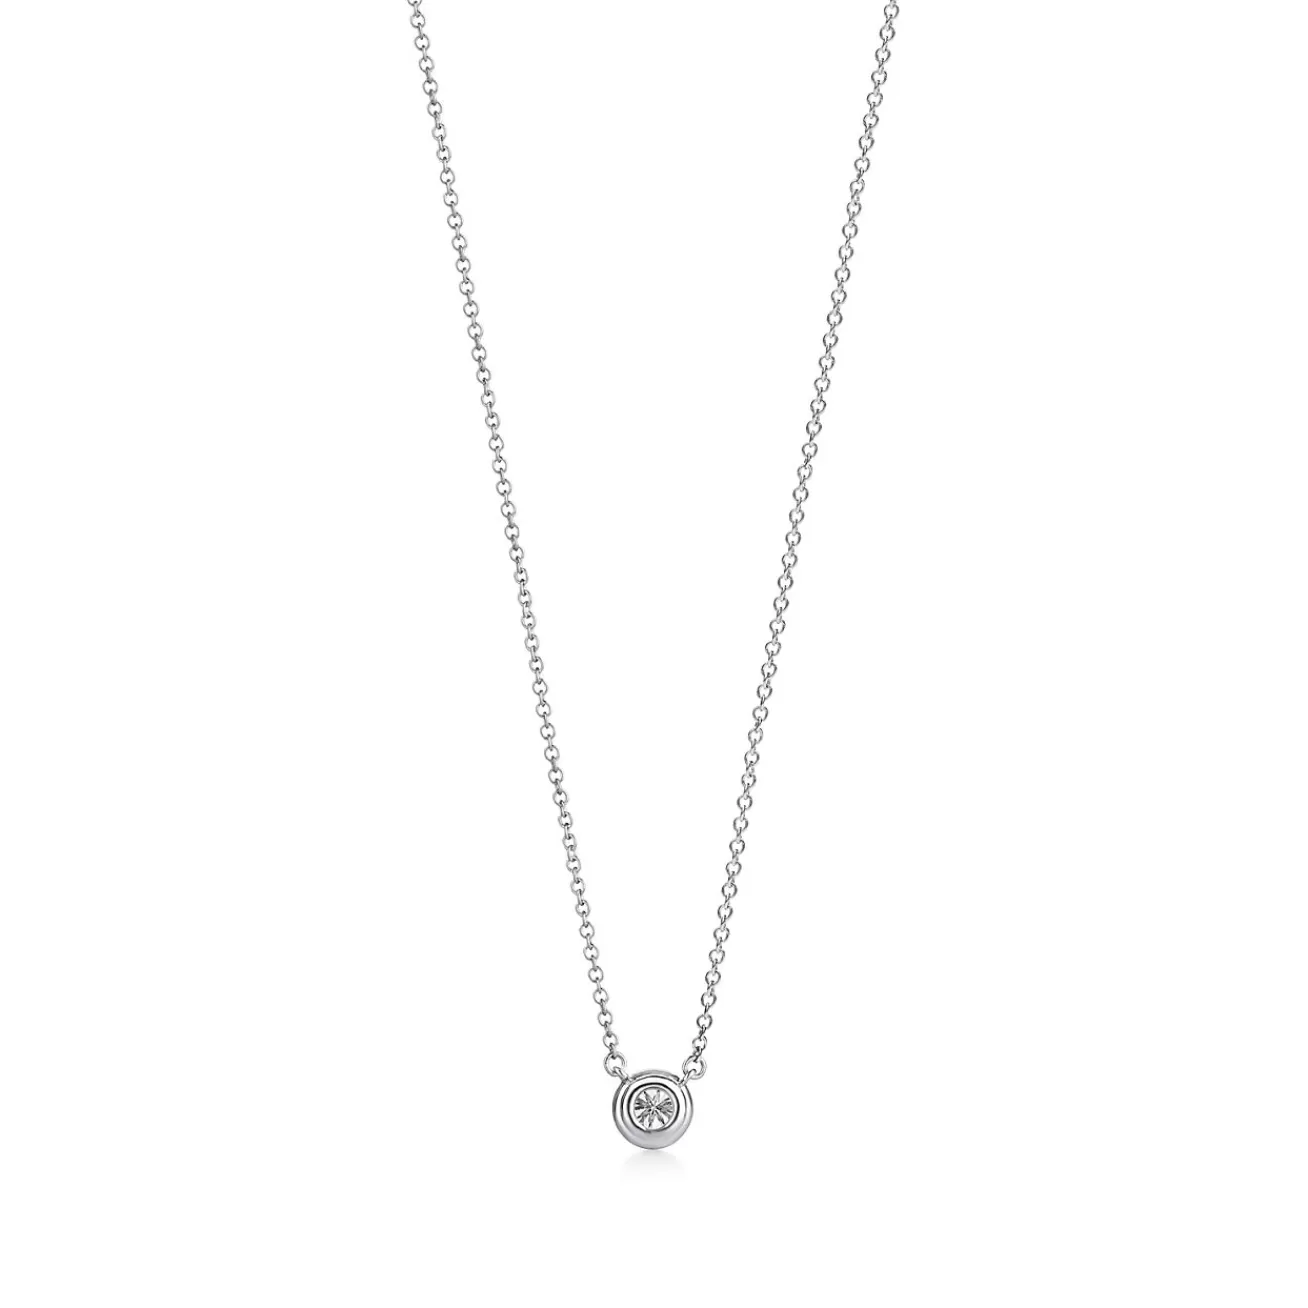 Tiffany & Co. Tiffany Soleste® pendant in platinum with diamonds. | ^ Necklaces & Pendants | Gifts for Her